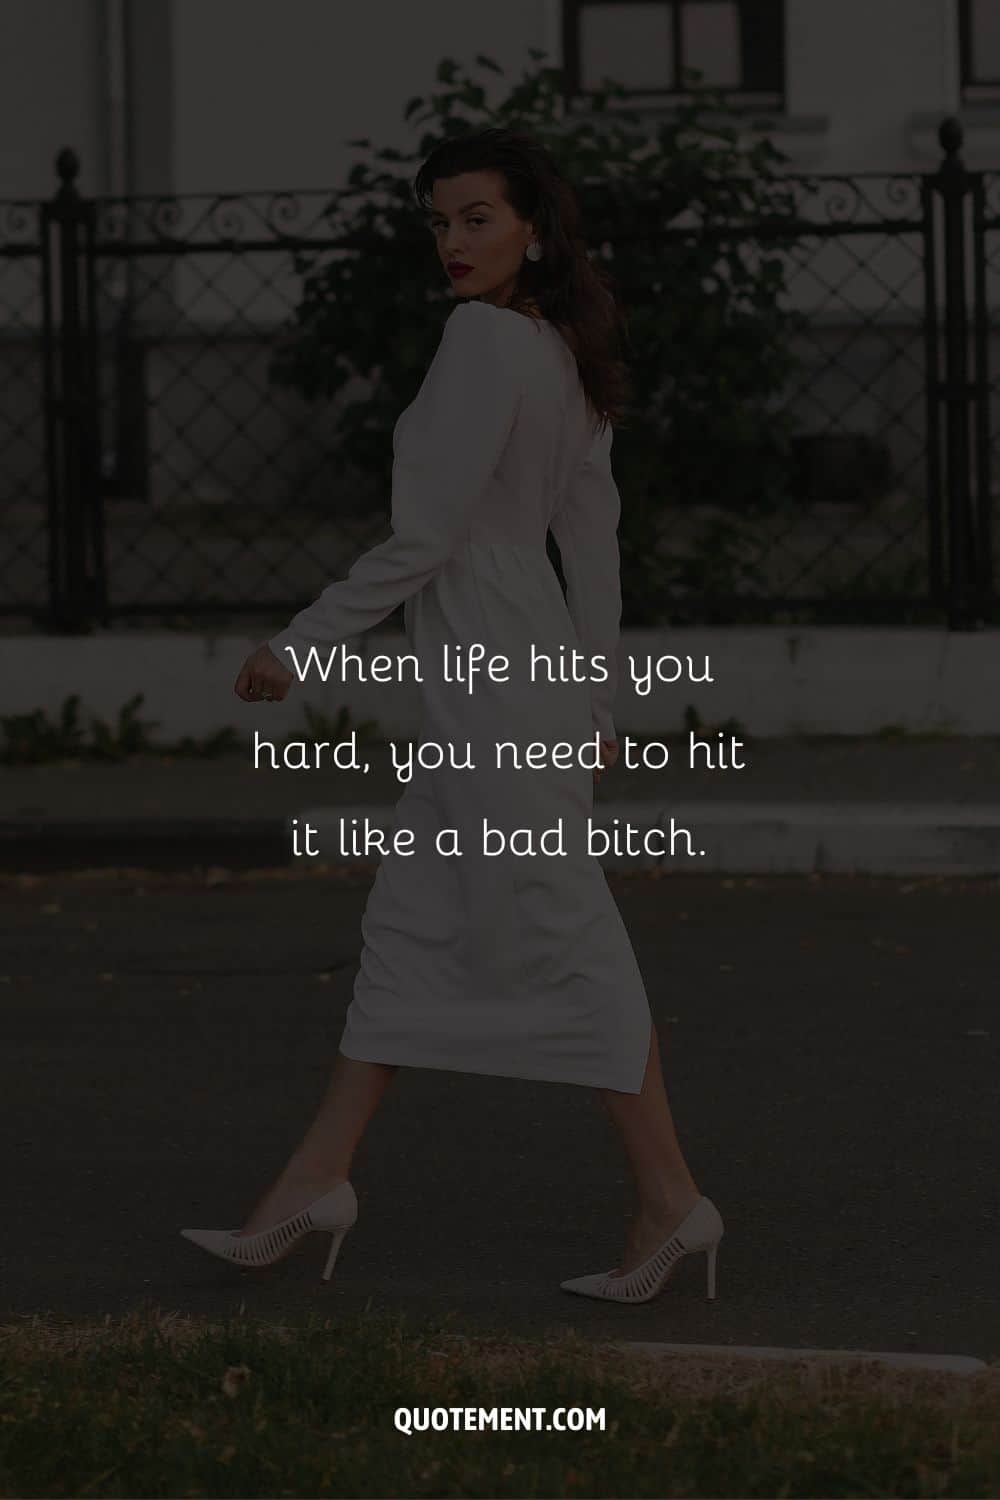 Image of a stunning lady wearing white representing boss bitch caption.